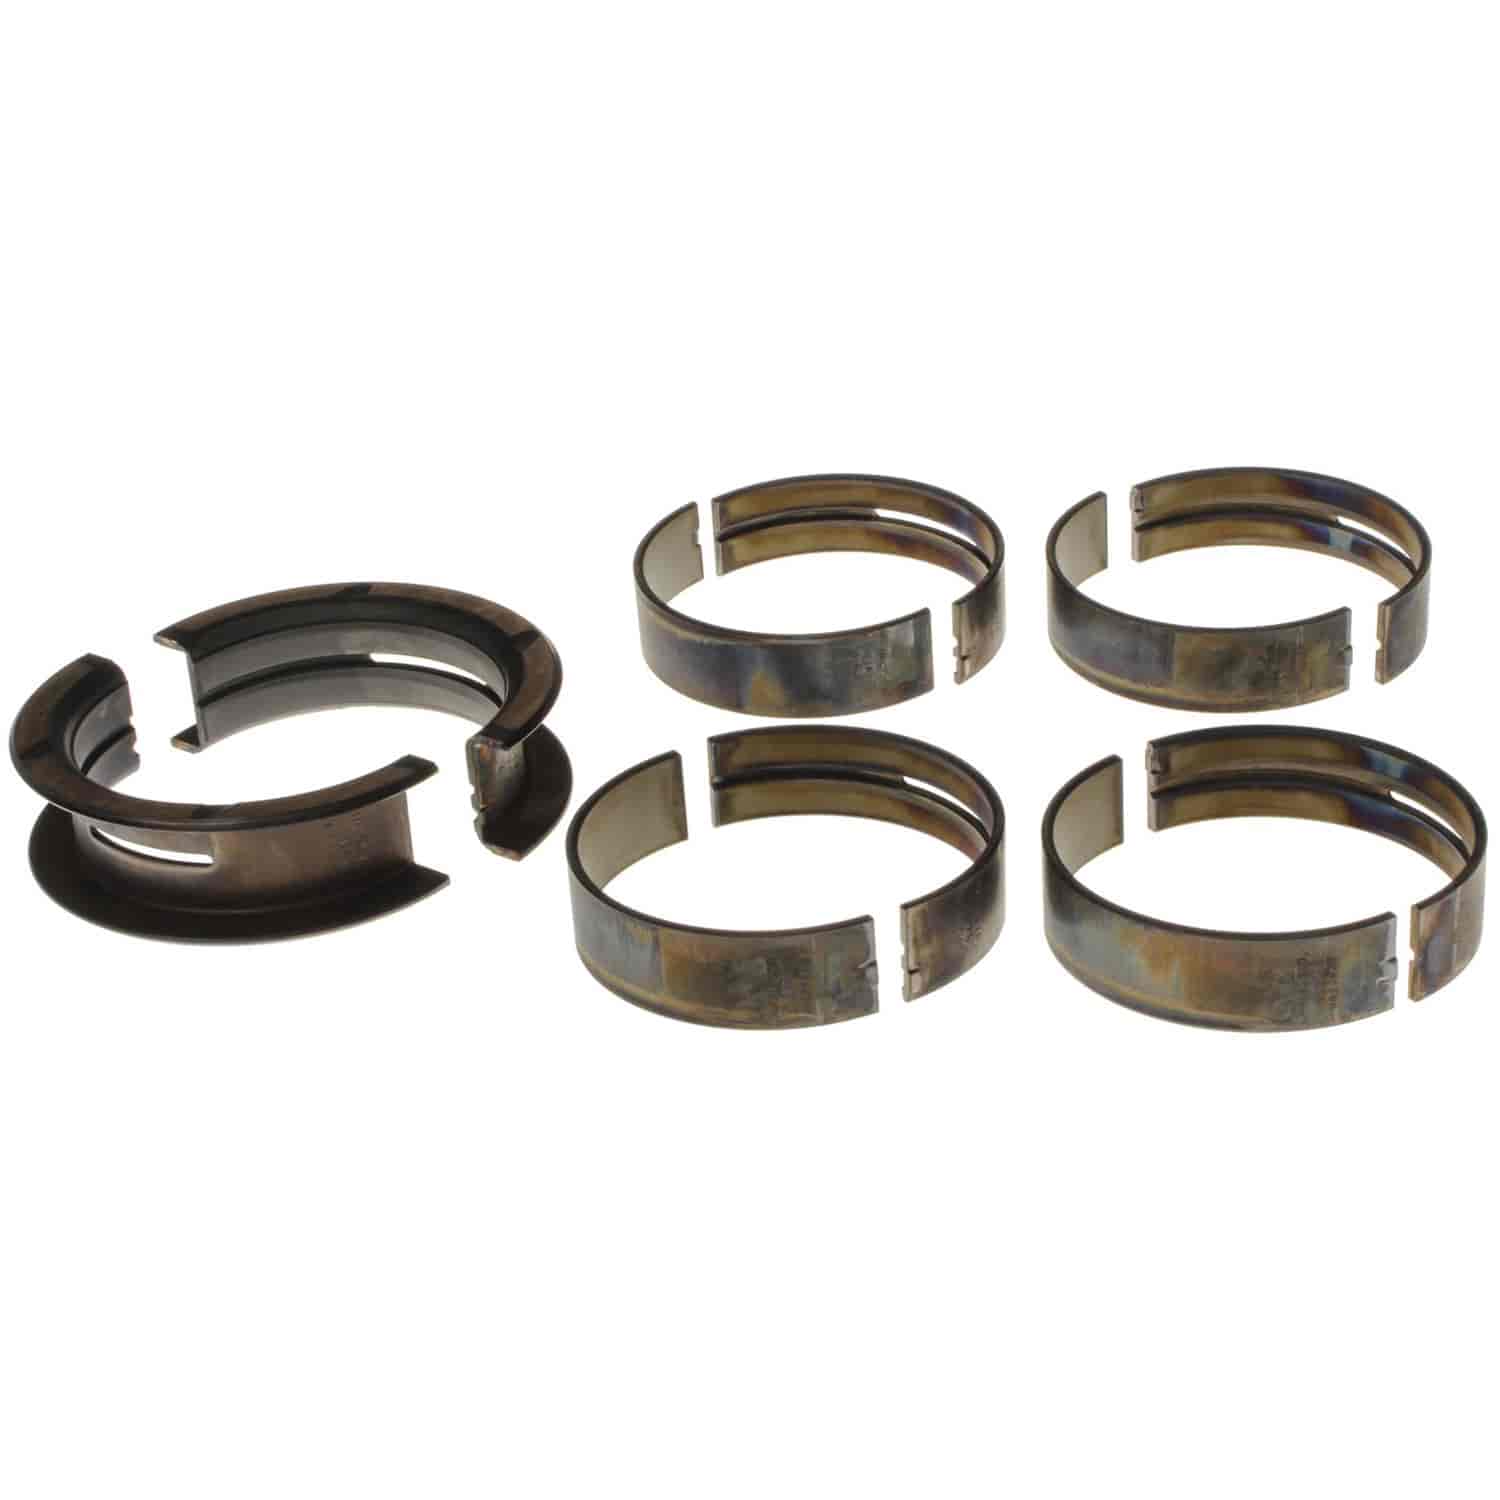 Main Bearing Set Ford 1971-1997 V8 351W/351M/400 (5.8/6.6L) with -.010" Undersize